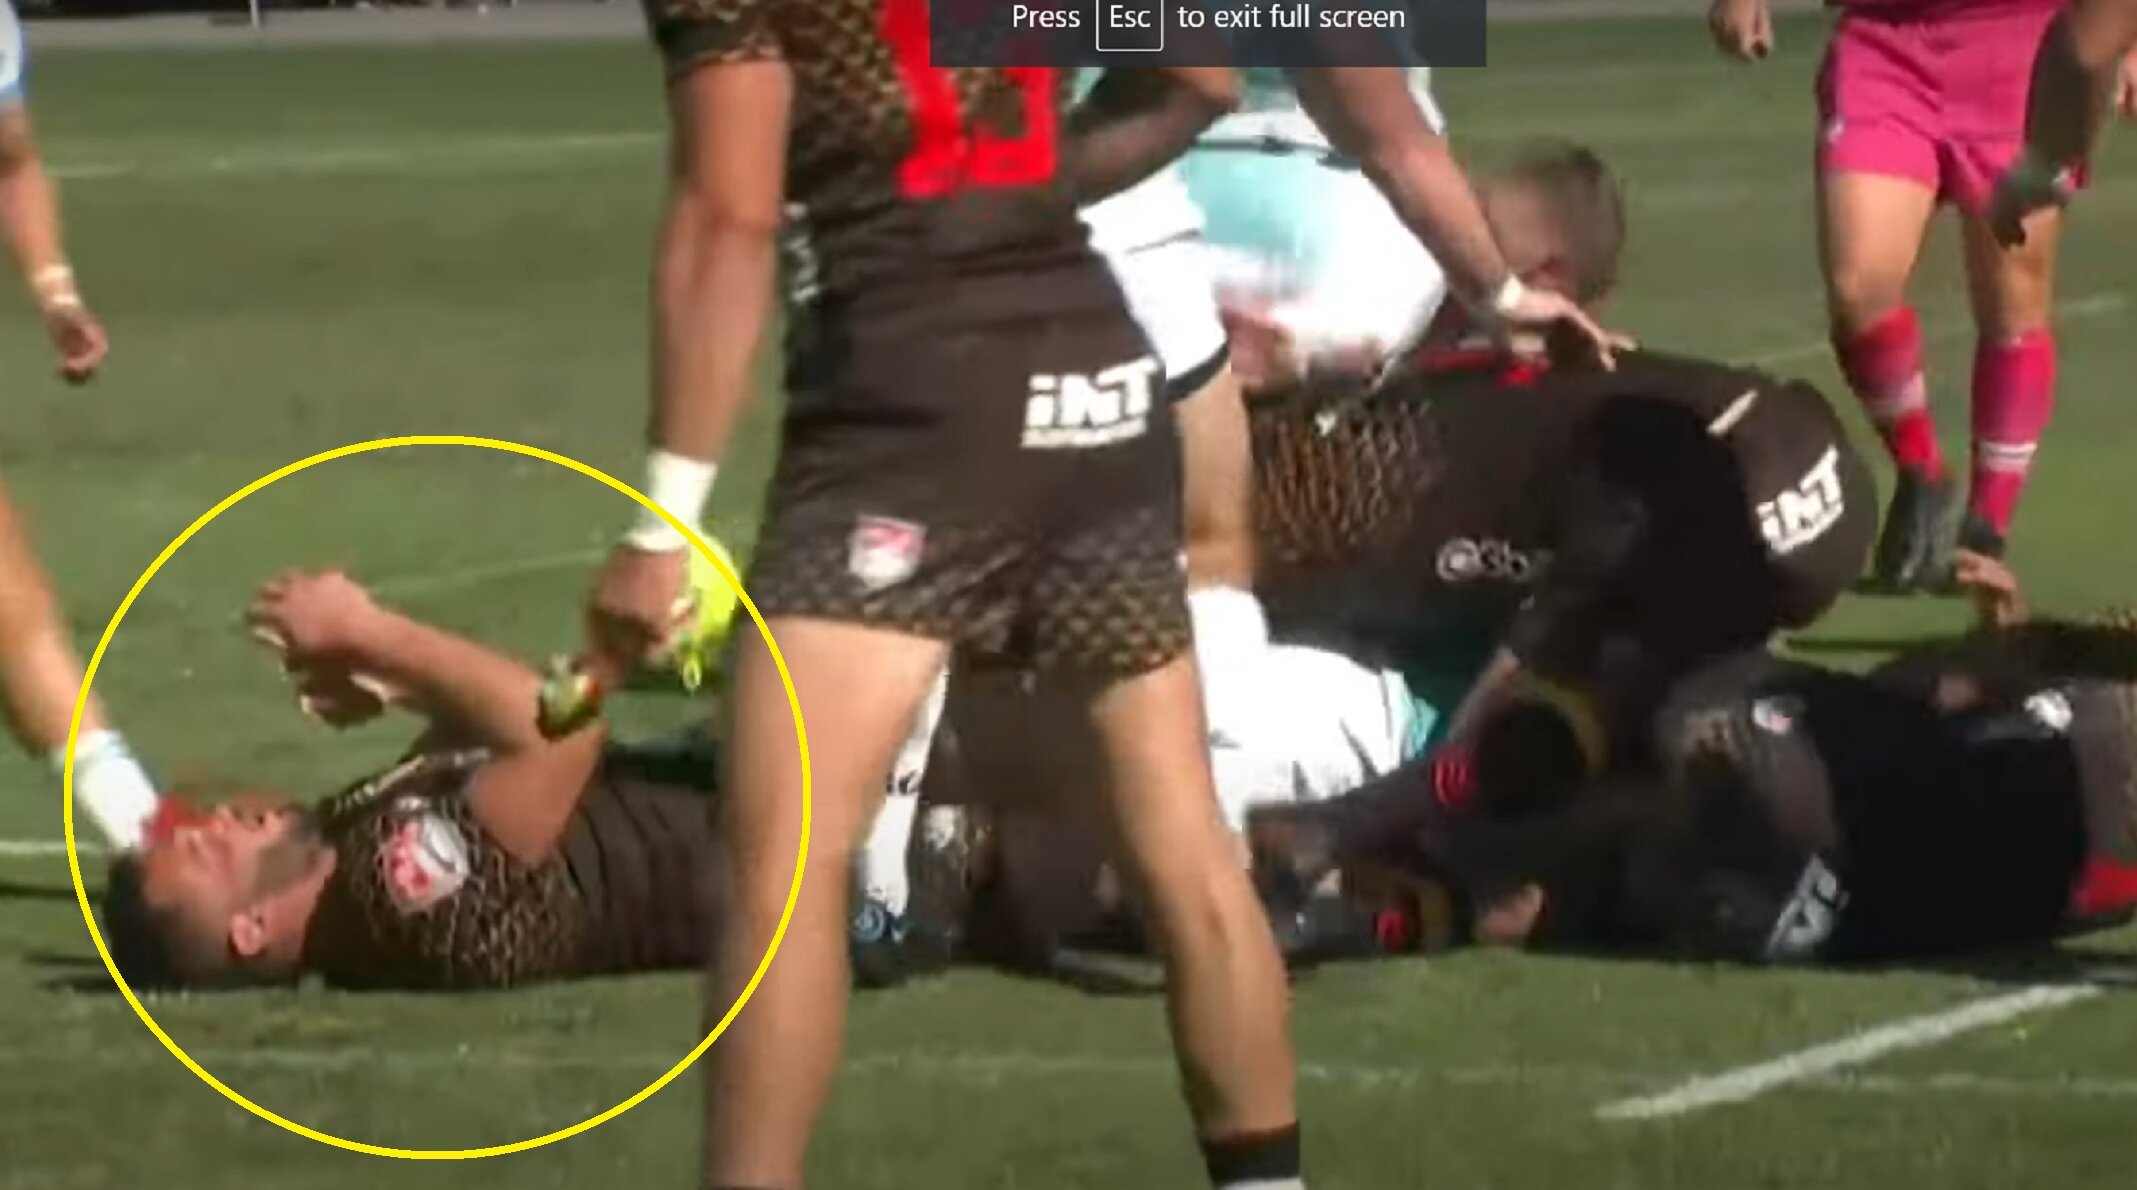 MLR player tries Cowan-Dickie tackle technique and regrets it